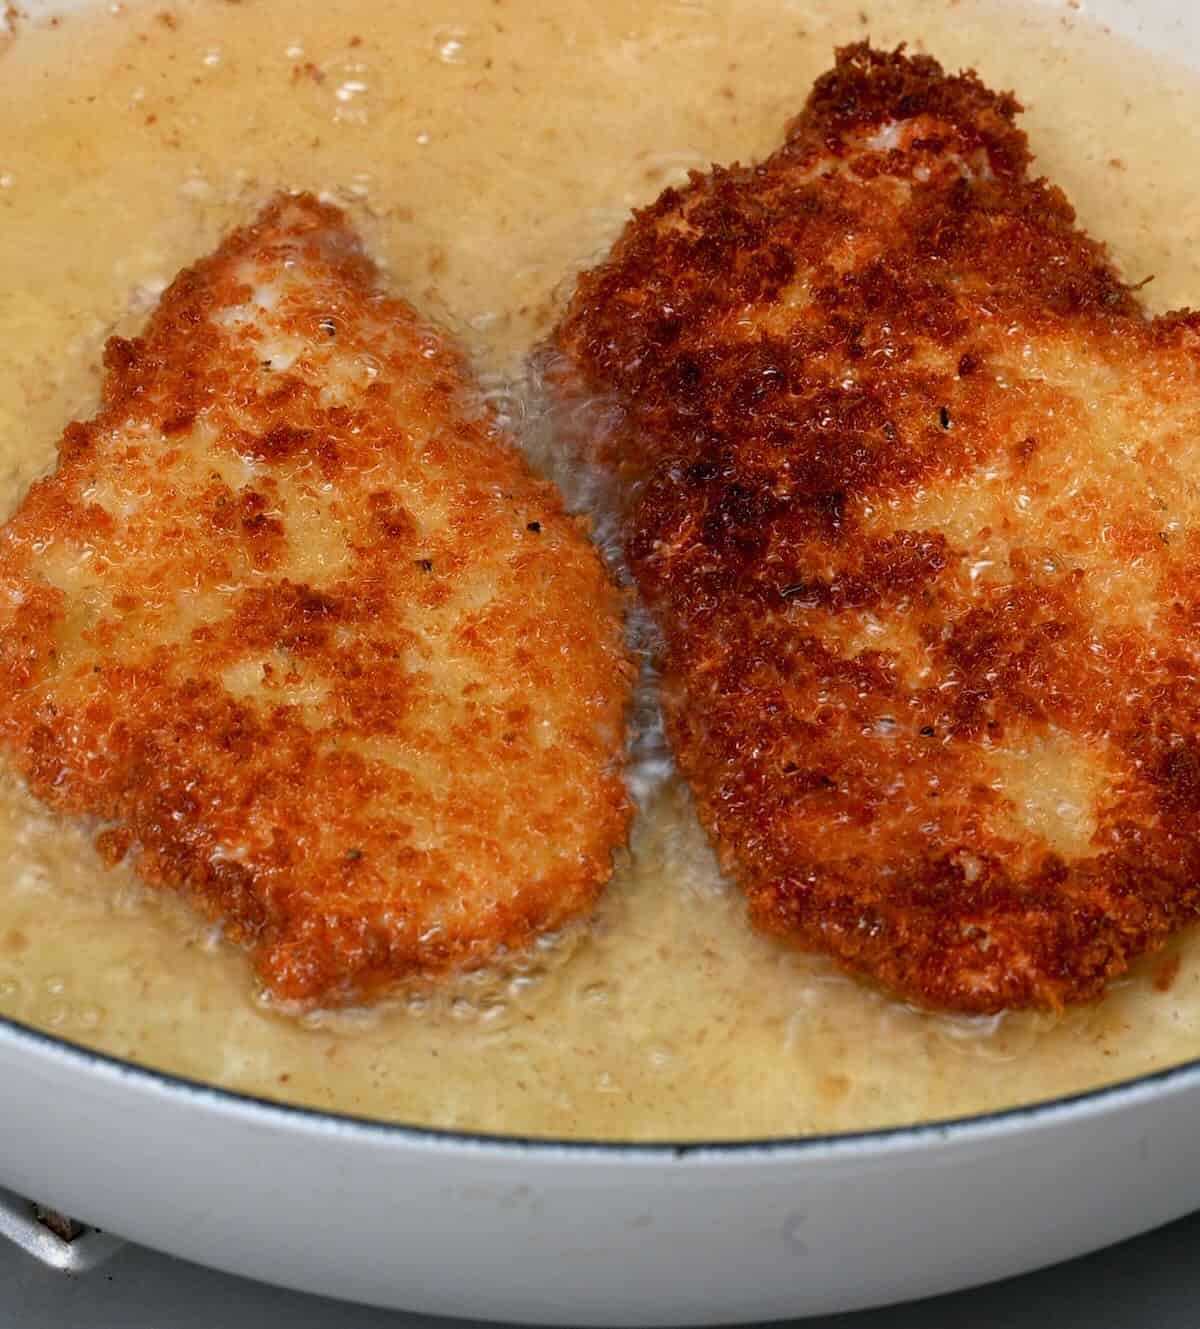 pan fry the breaded chicken breasts